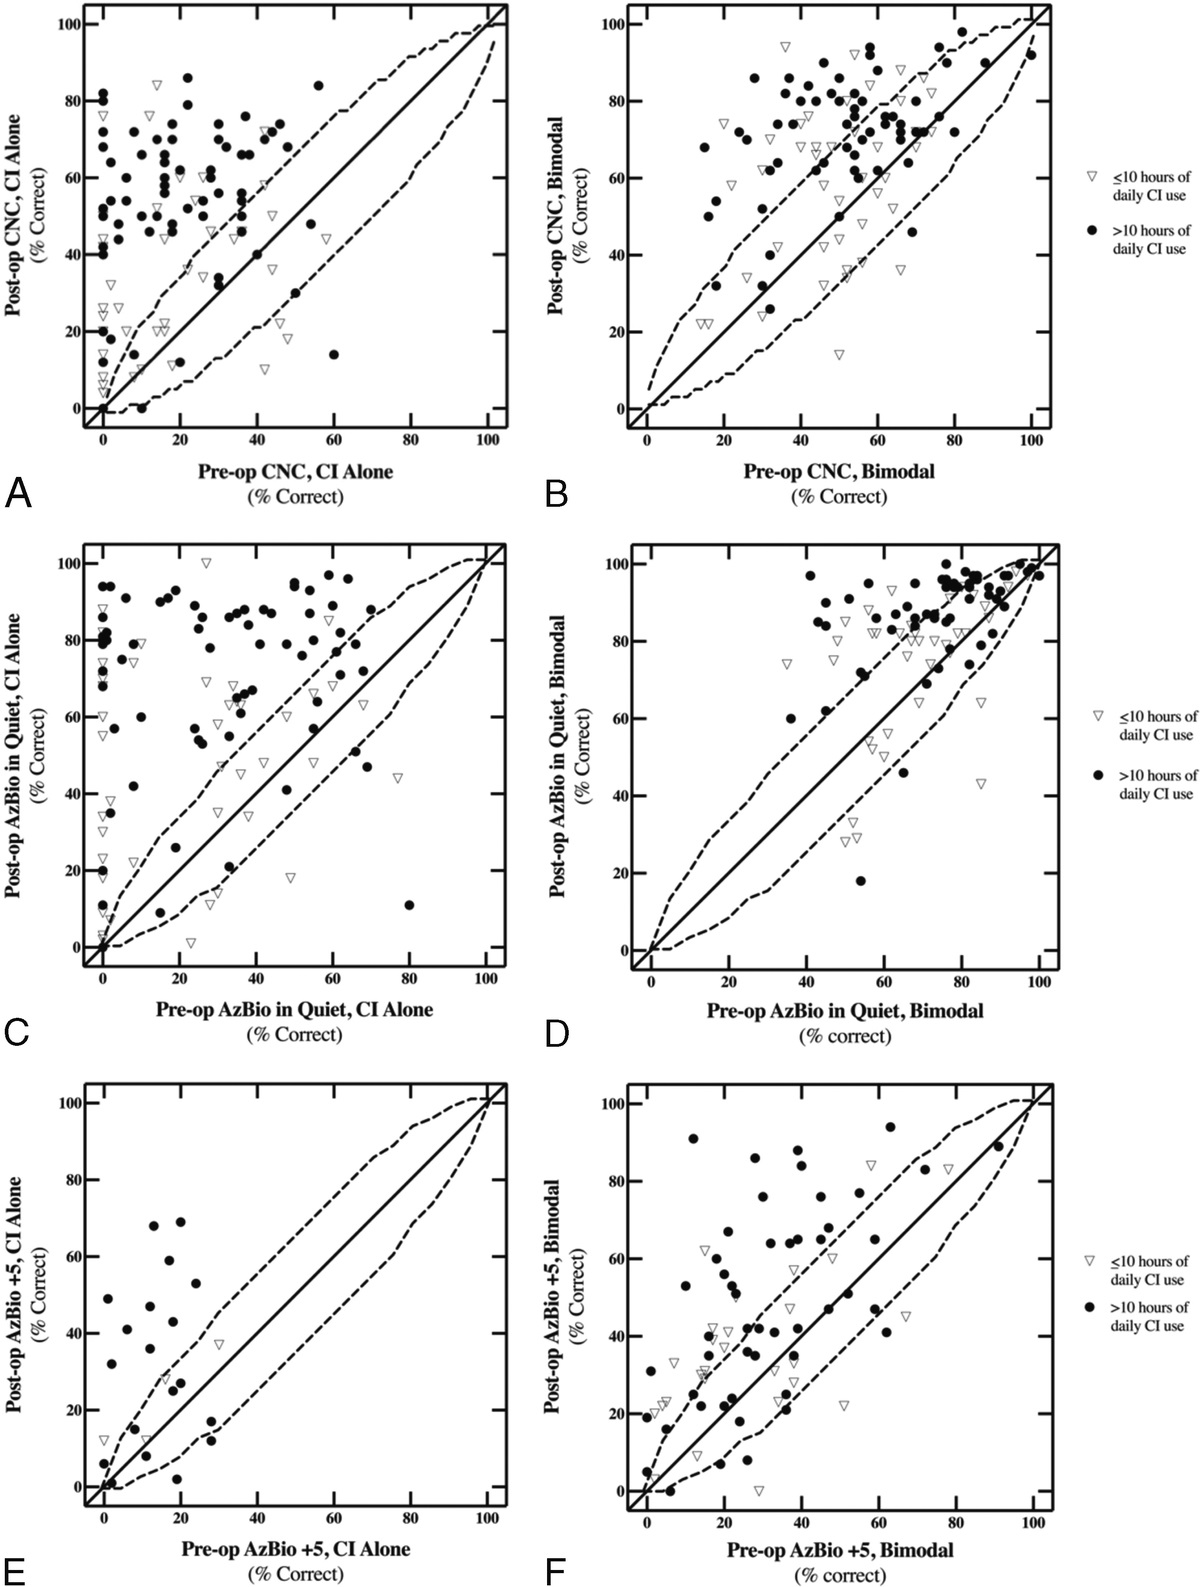 Further Evidence for Individual Ear Consideration in Cochlear Implant Candidacy Evaluation